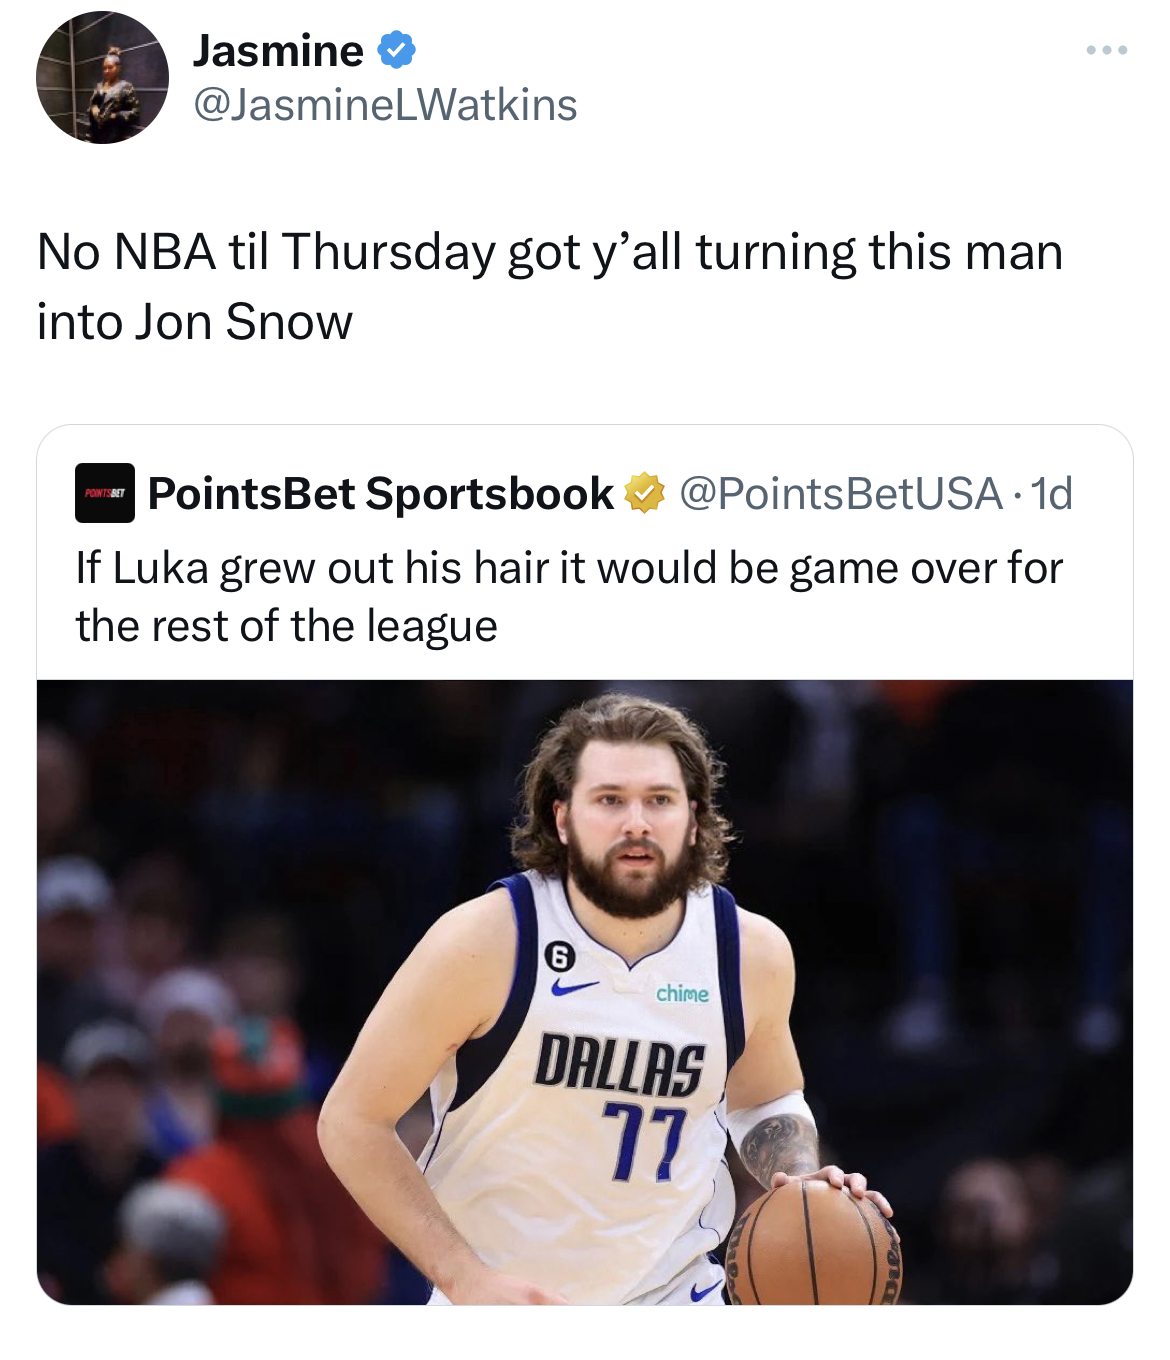 Tweets dunking on celebs - photo caption - Jasmine No Nba til Thursday got y'all turning this man into Jon Snow PointsBet Sportsbook BetUSA. 1d If Luka grew out his hair it would be game over for the rest of the league 6 Dallas 77 www